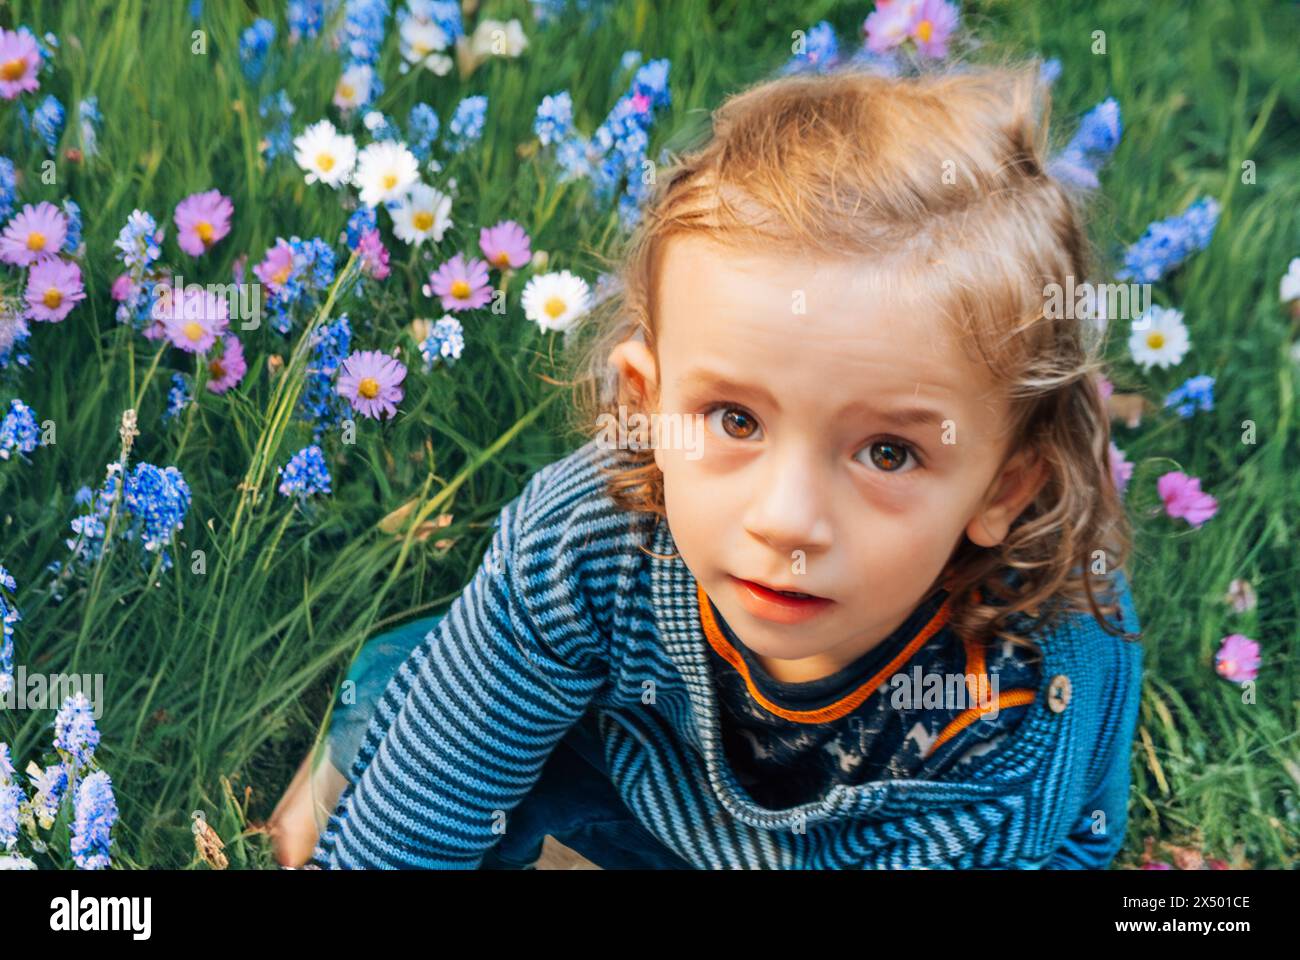 Little blond long-haired boy sitting in a meadow among daisies and other wildflowers and looking at camera Stock Photo